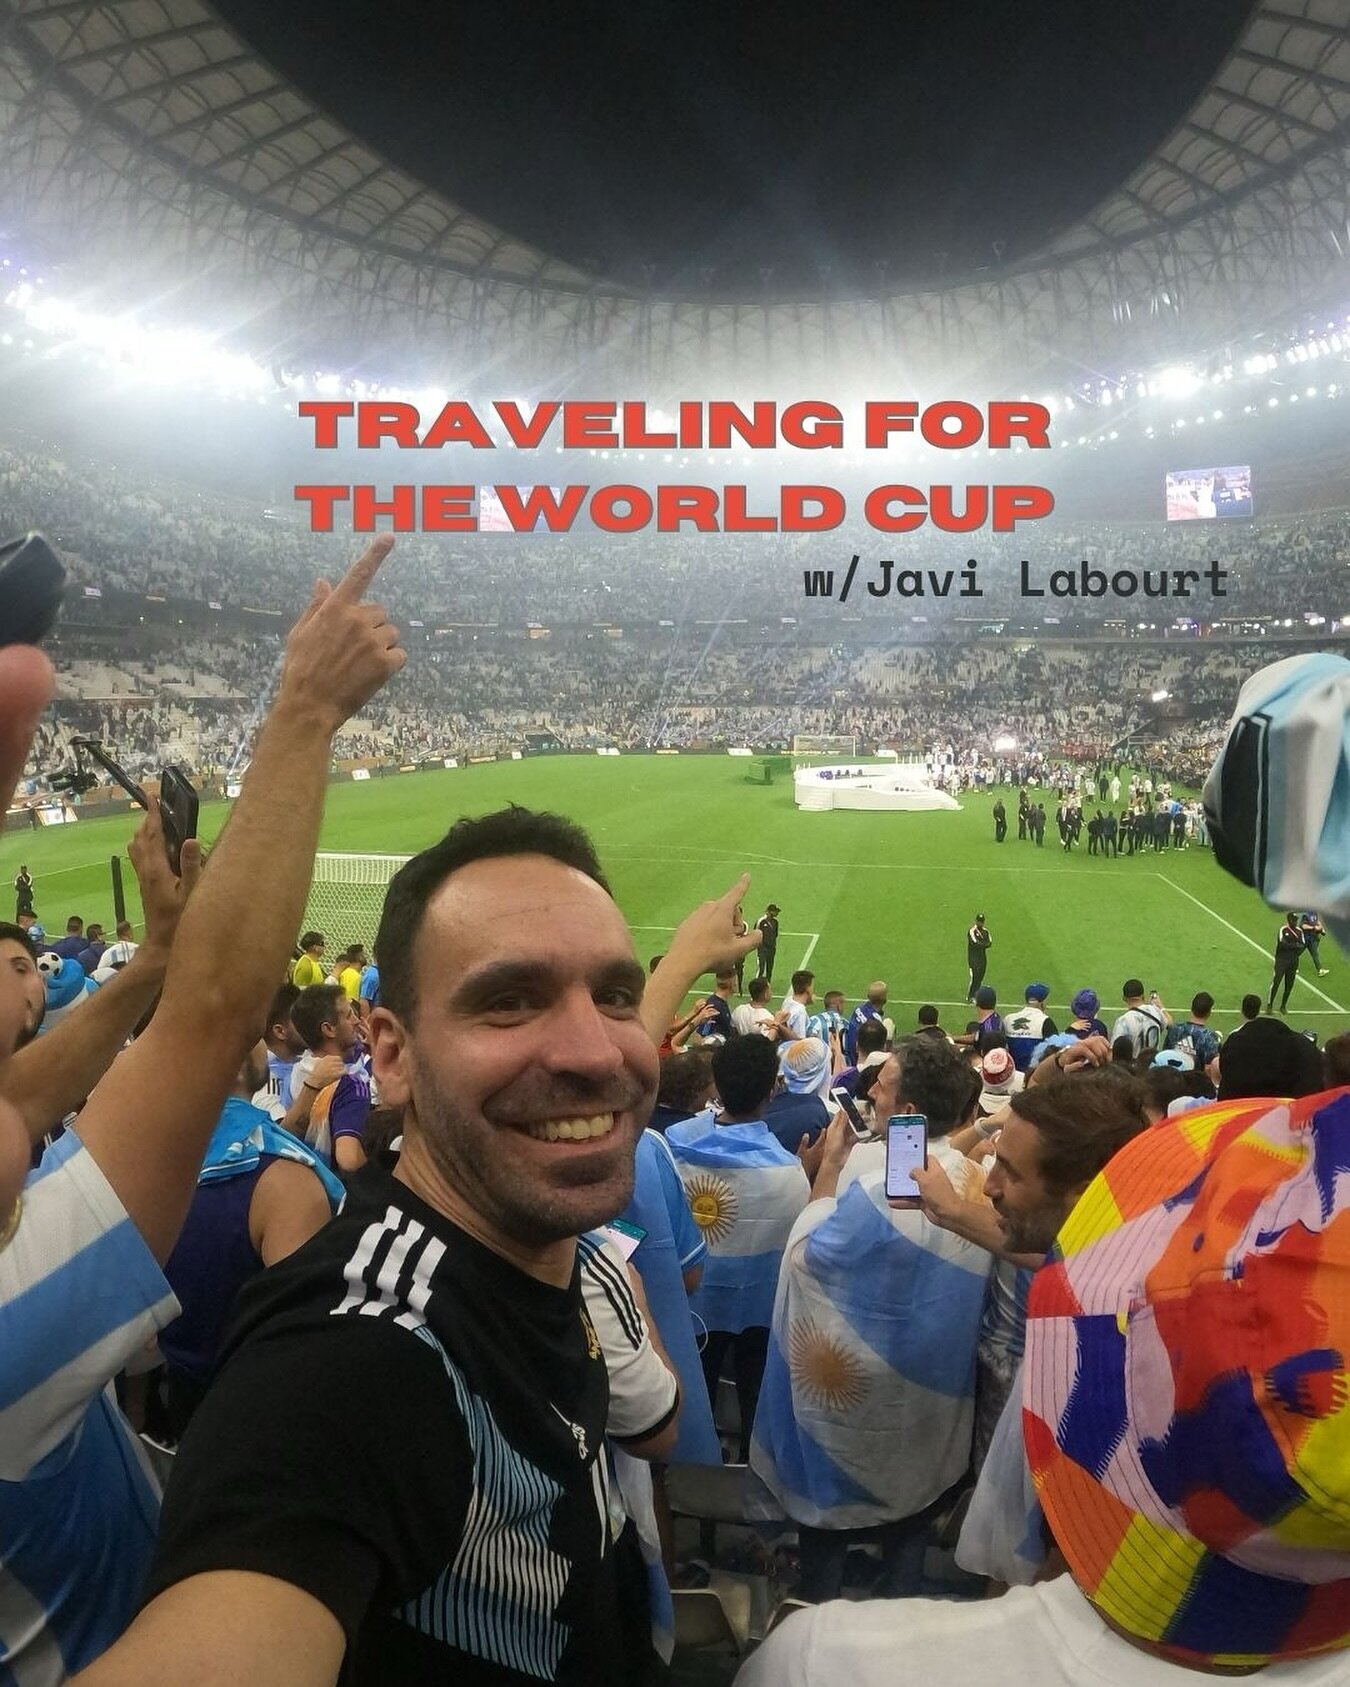 The FIFA World Cup takes place every 4 years and guest @javilabourt has attended 3 tournaments including the South Africa, Brazil, and Qatar editions. As a devout Argentina football fan, he has seen his national team lose and win a World Cup Final. T